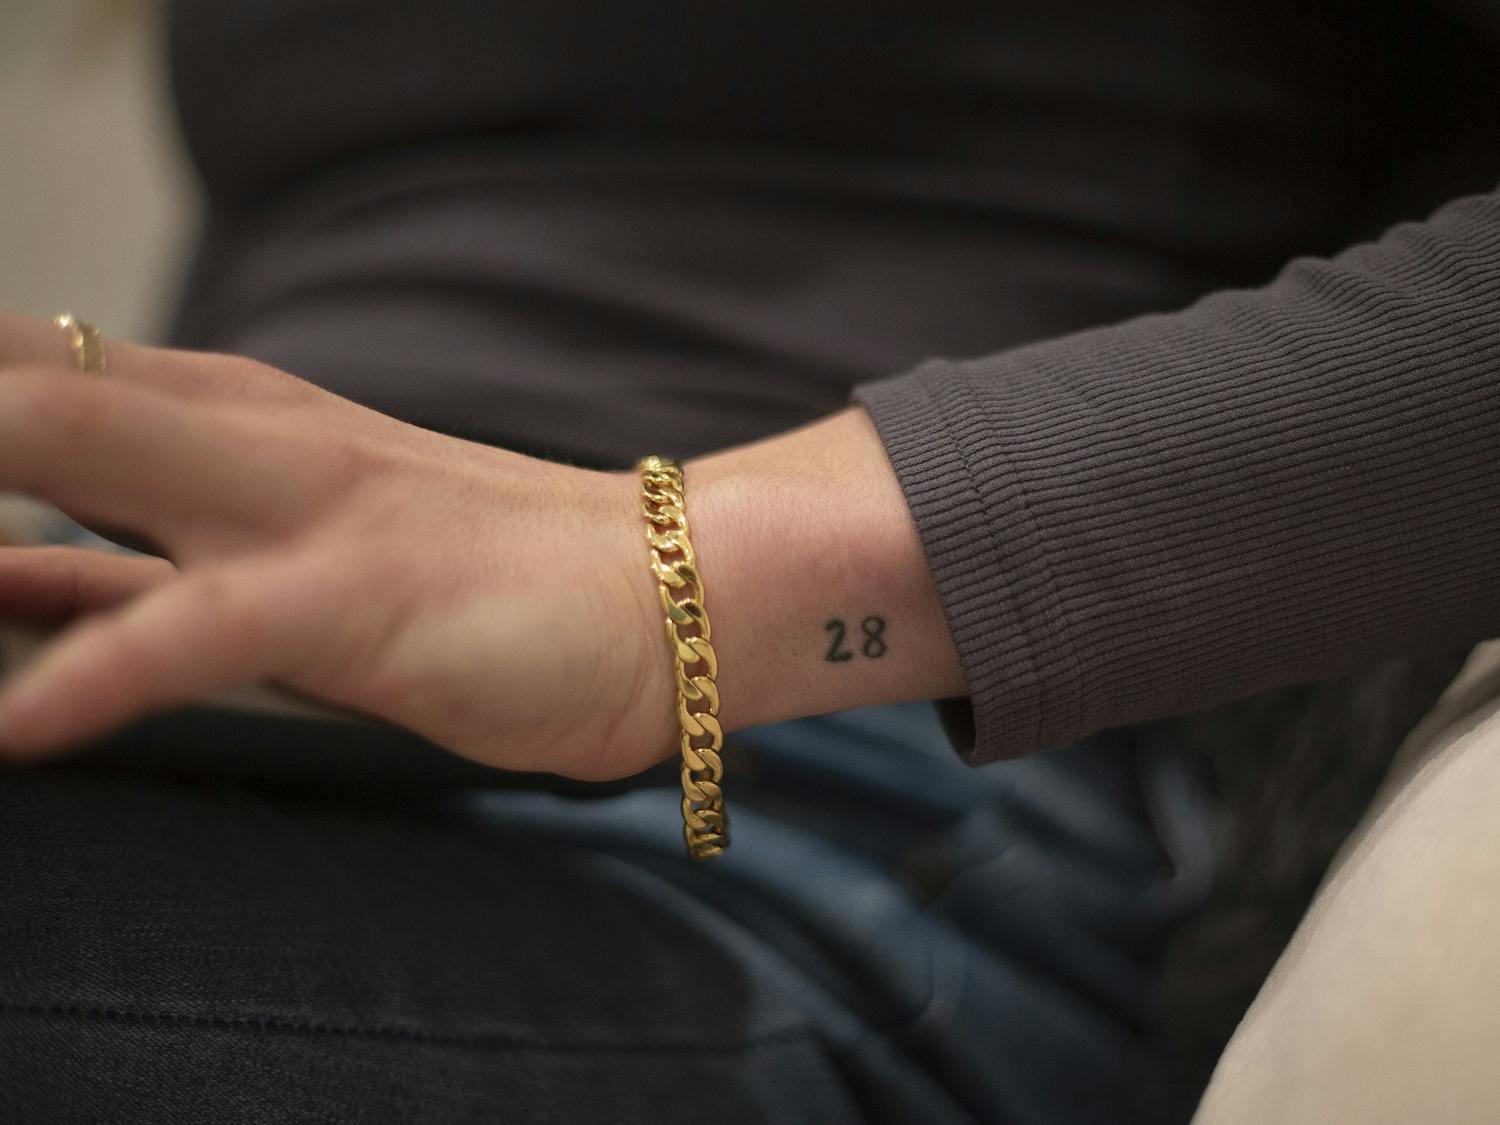 Alexa Casciano sits in her friend’s living room on February 2, 2021. Casciano was in the hospital for 28 days when she was sixteen. The experience changed her outlook on life. Casciano said, “I actually have this tattoo of 28, and again it kind of reminds me that if I can go through that 28 days, I can do anything.” Photo courtesy of Dana Gentry.